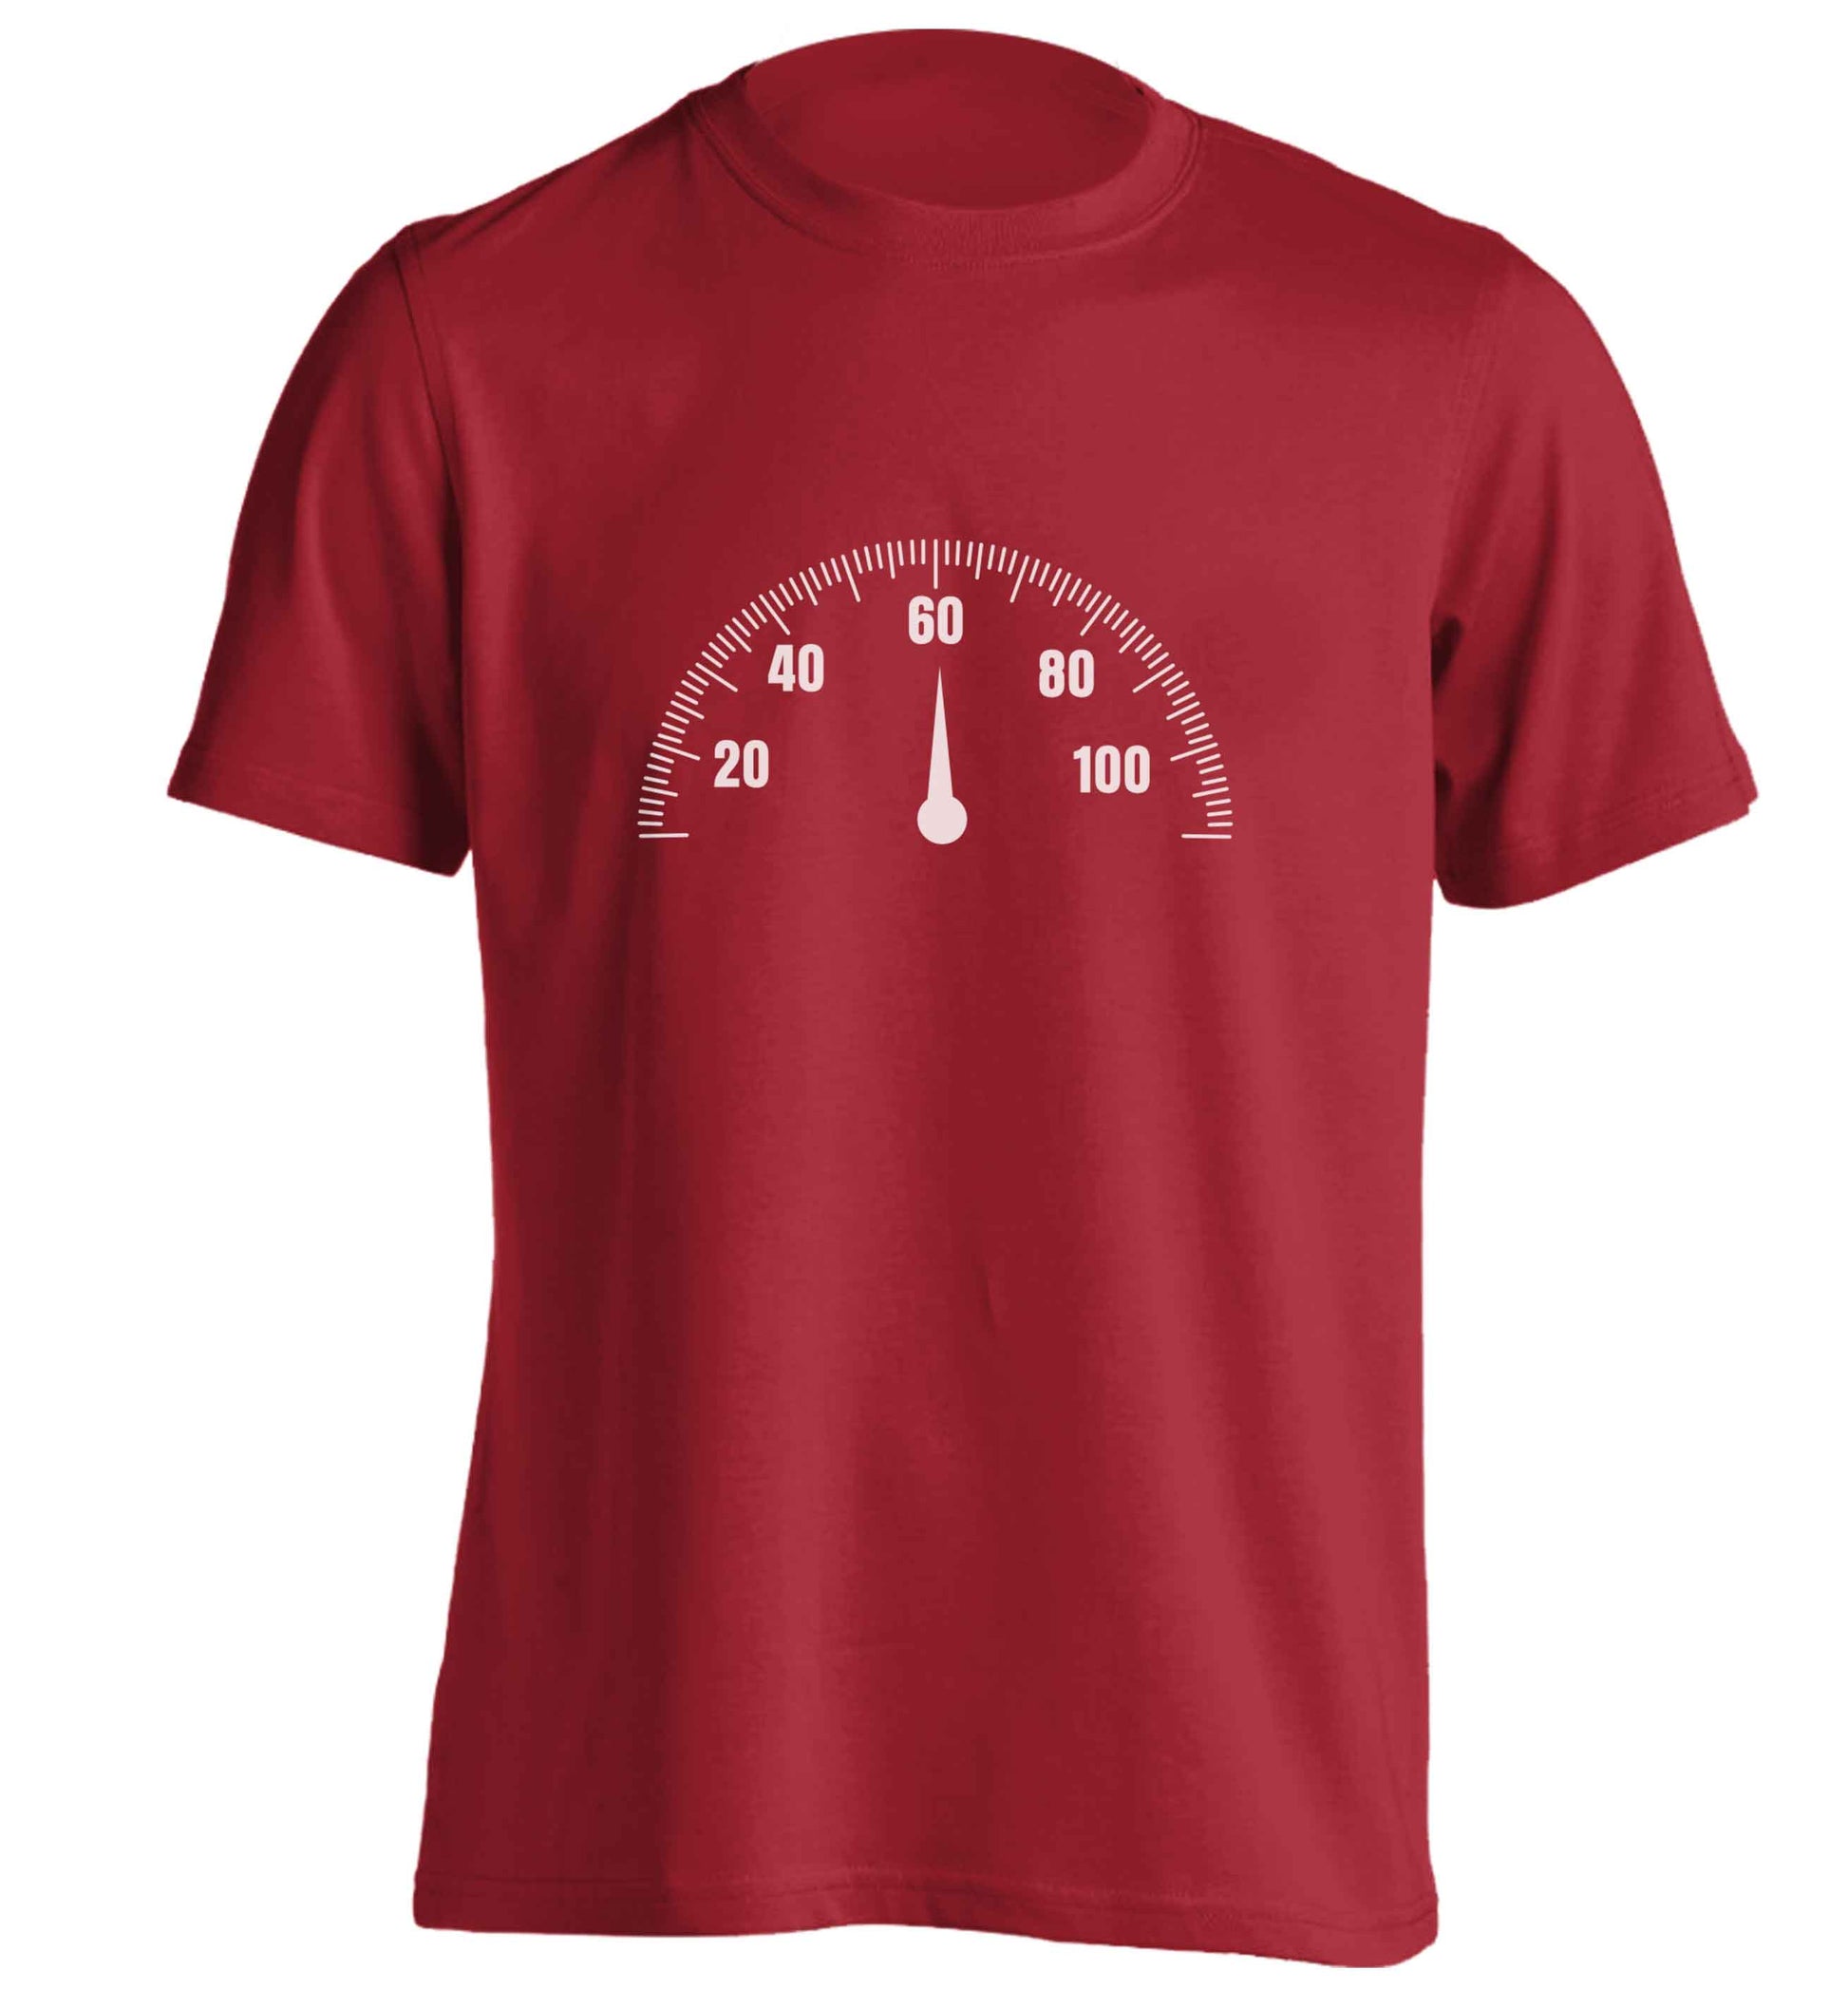 Speed dial 60 adults unisex red Tshirt 2XL